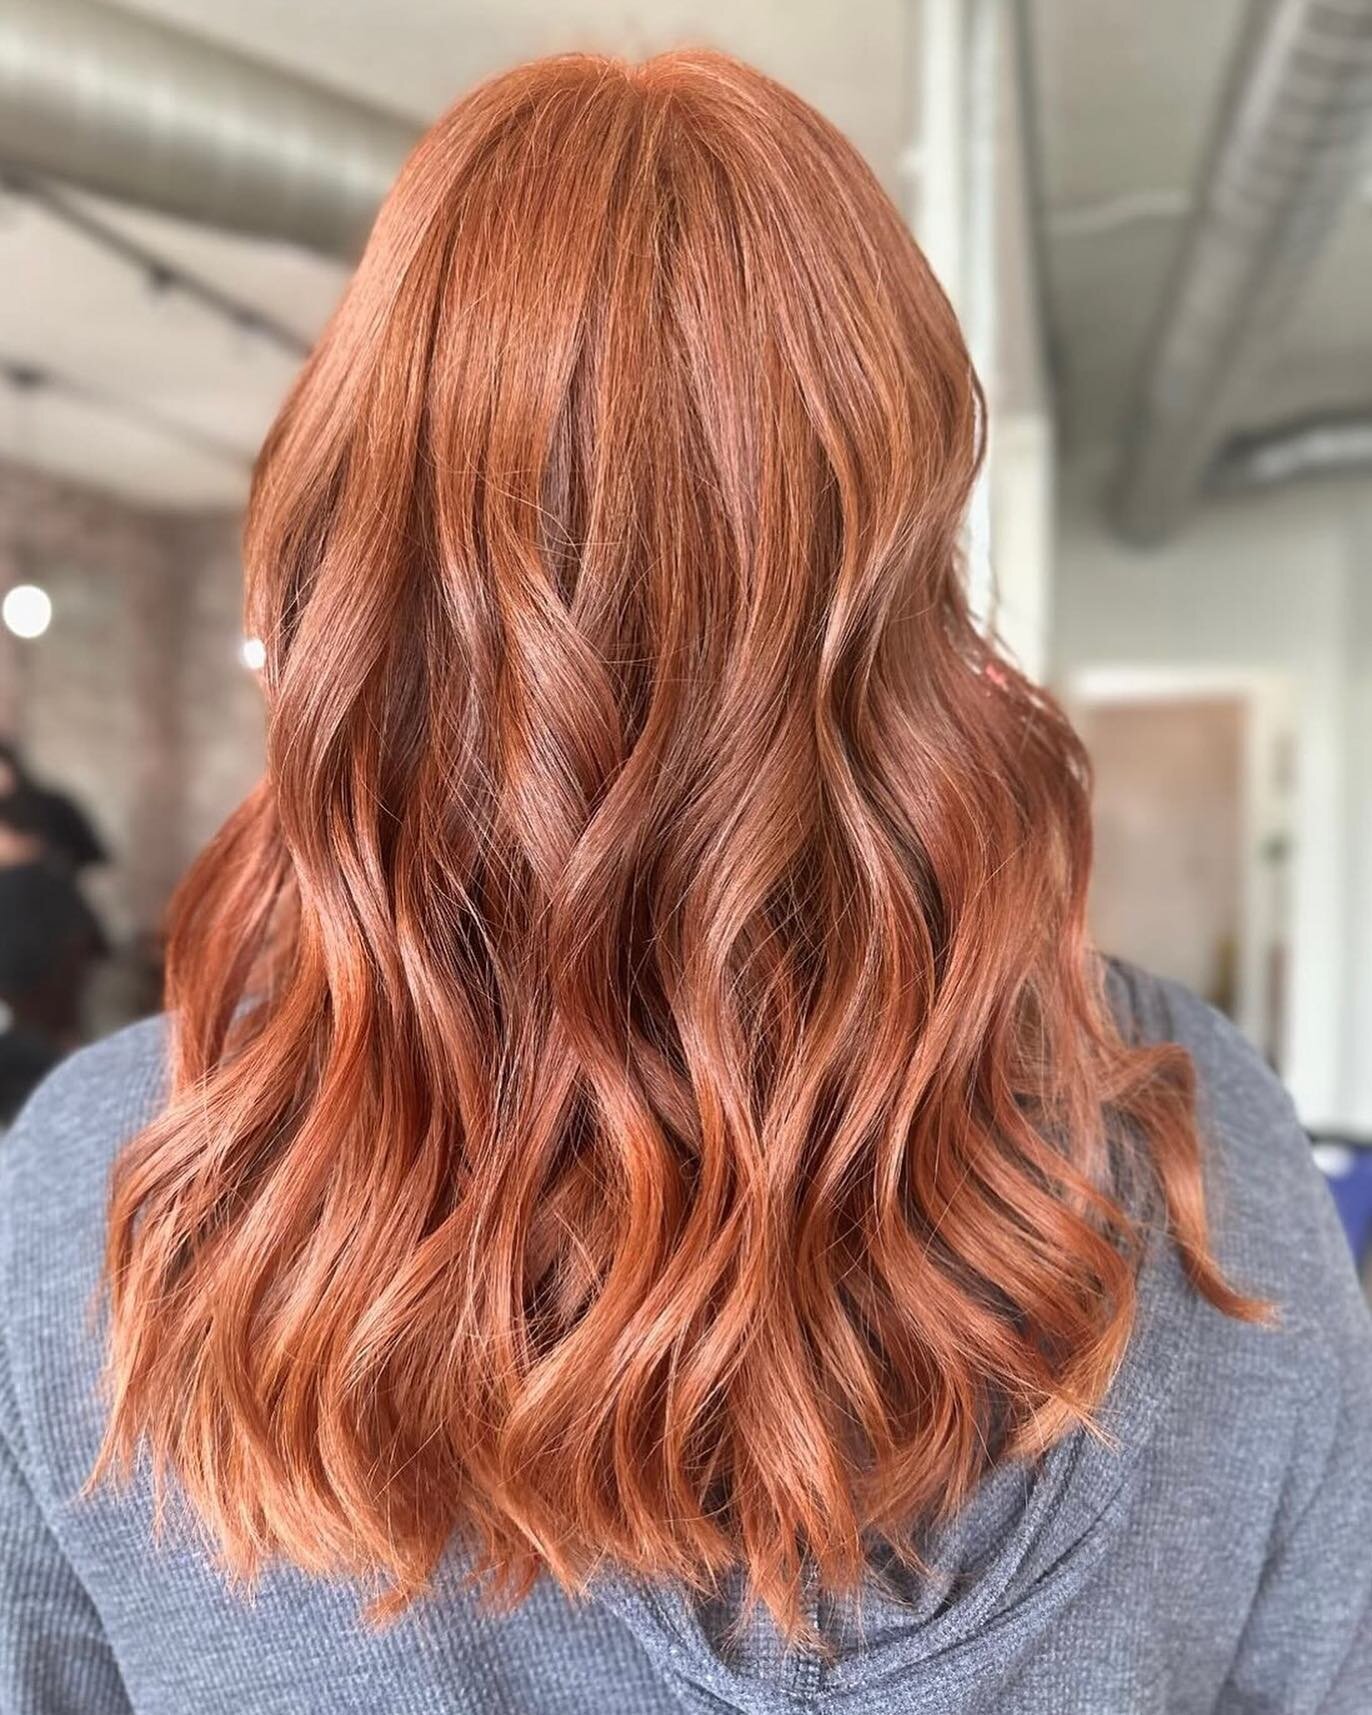 Unleashing the wild side with this Copper read  Wolf Cut Shag. Bold , fierce and all about  that untamed vibe.
🔥✂️ 

#wolfcut #copperred #hairgamestrong